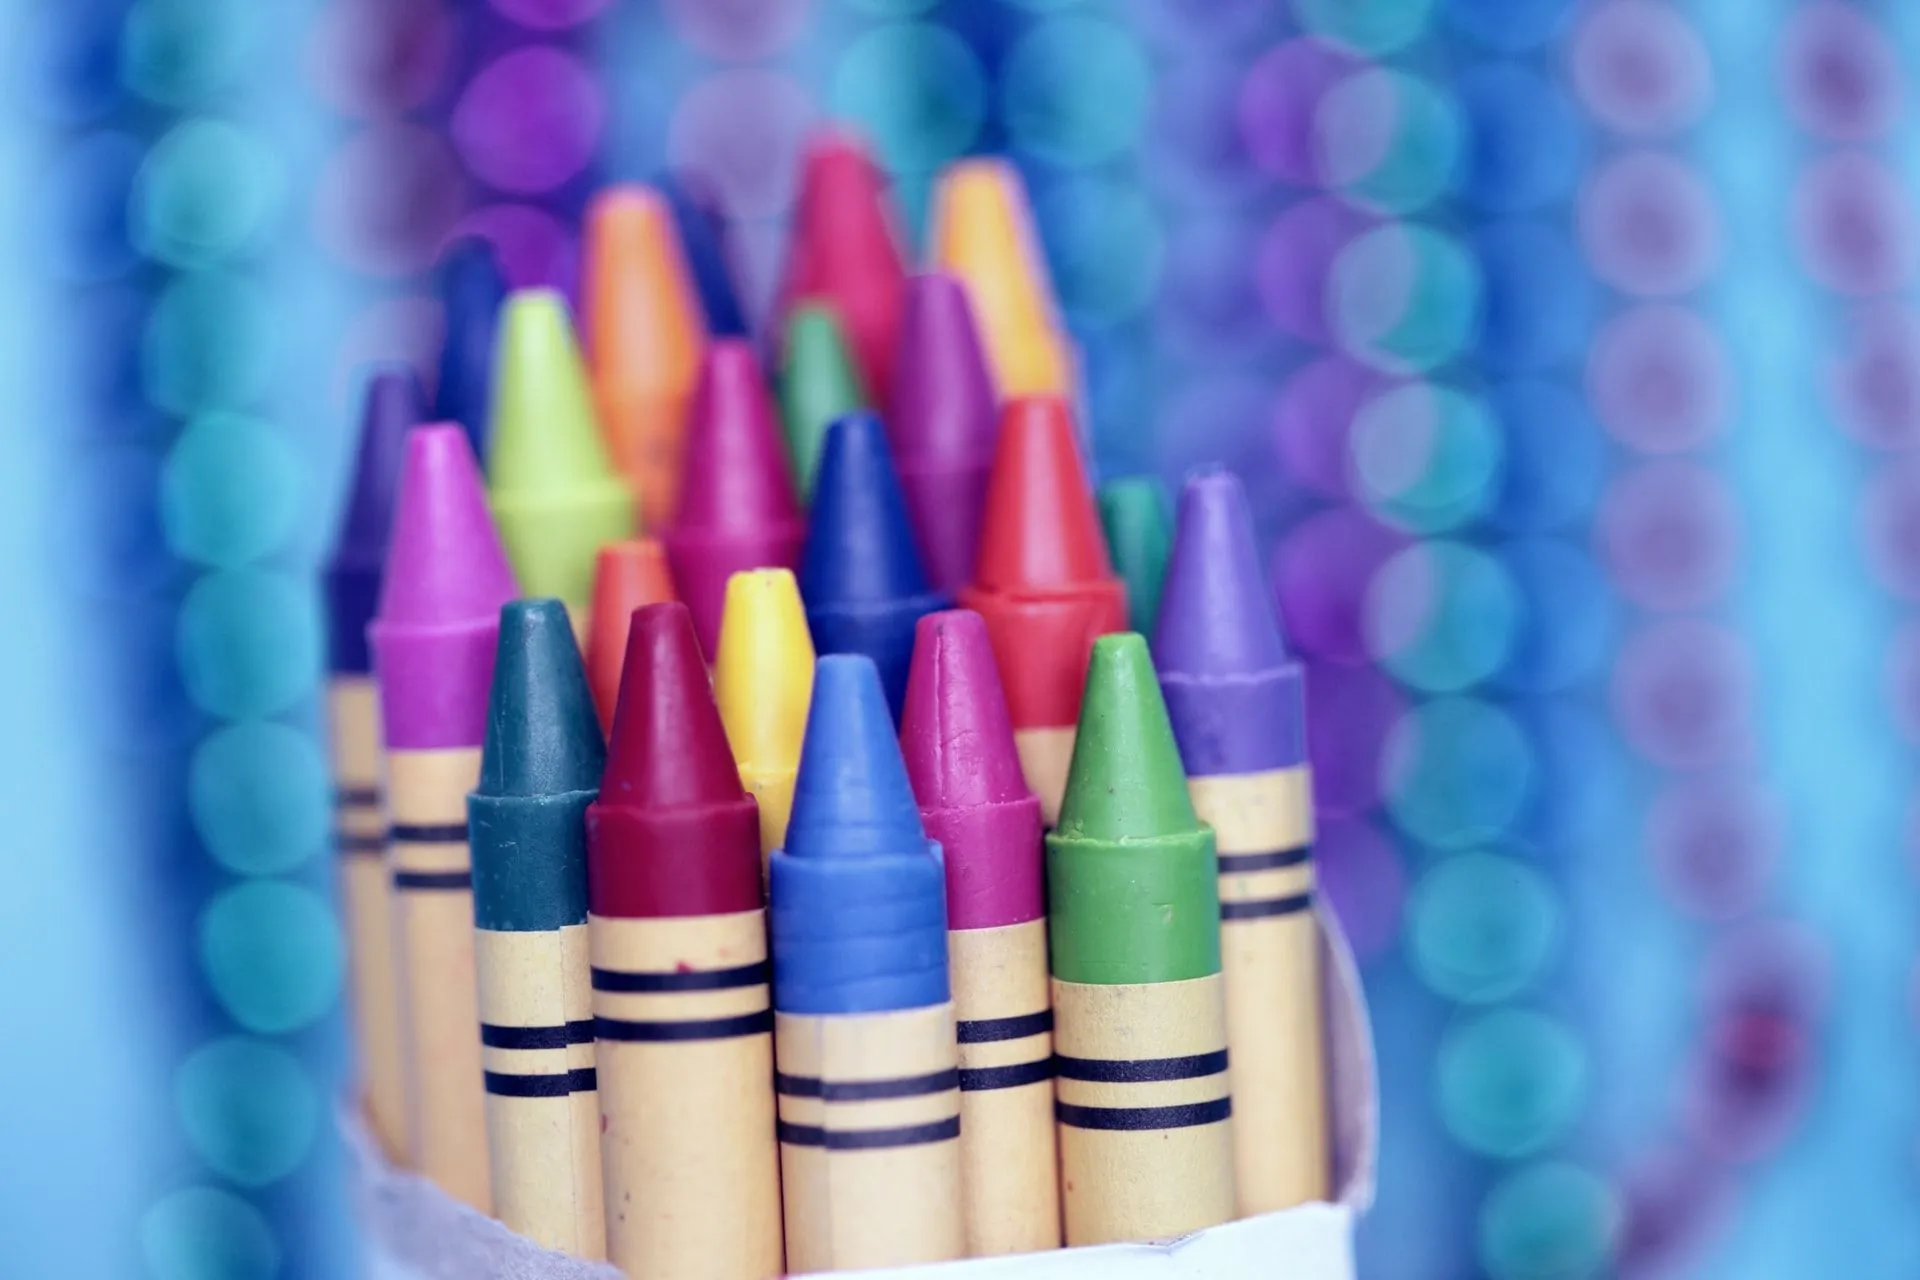 On March 31, National Crayon Day, which honors crayons, brings back incredible recollections of masterpieces by kids using their crayons.